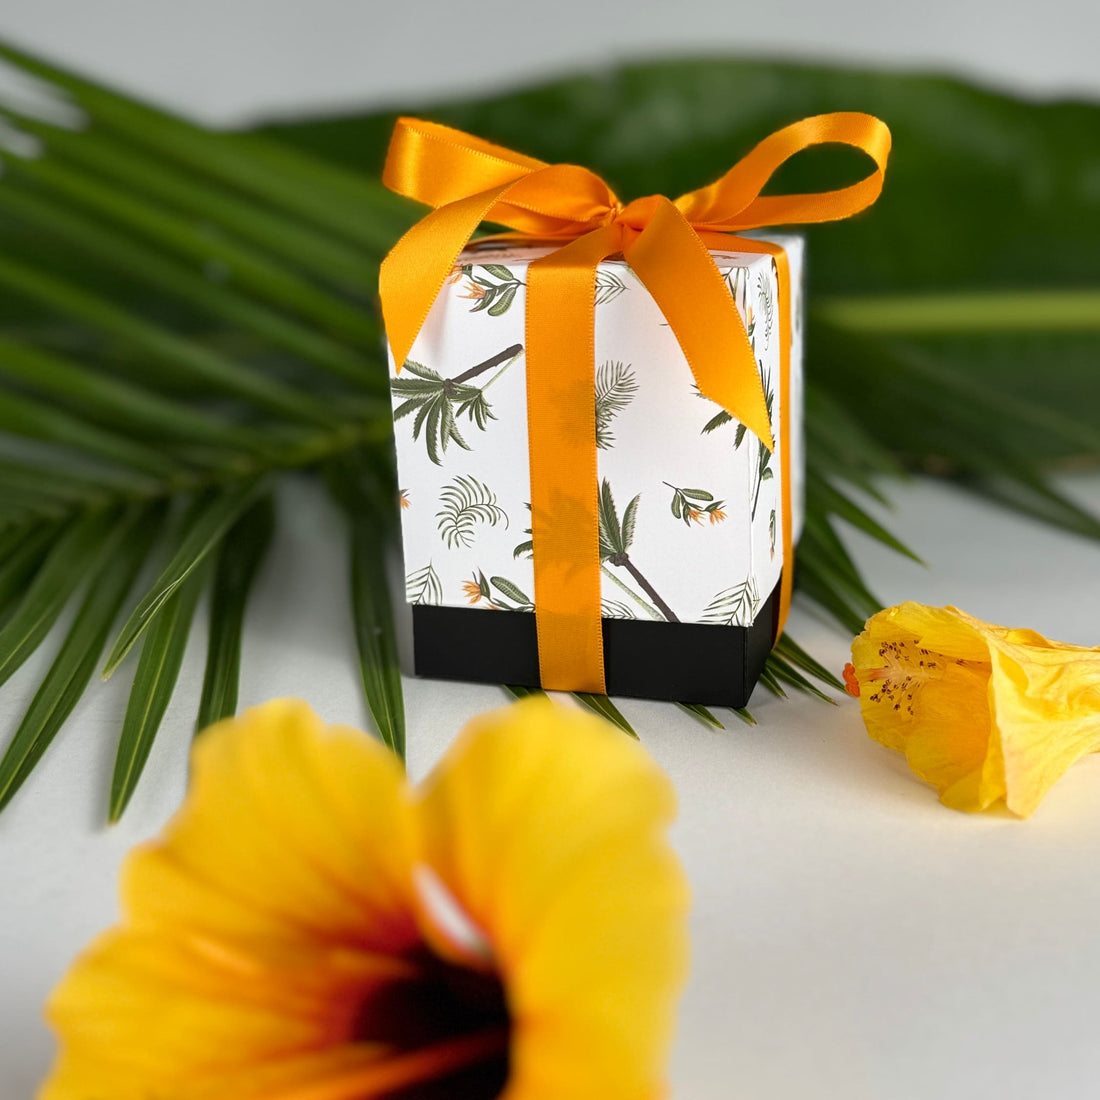 Golden orange hibiscus in foreground with Paradise Whispers product box featuring palm trees and bird of paradise flowers and black base tied in orange ribbon